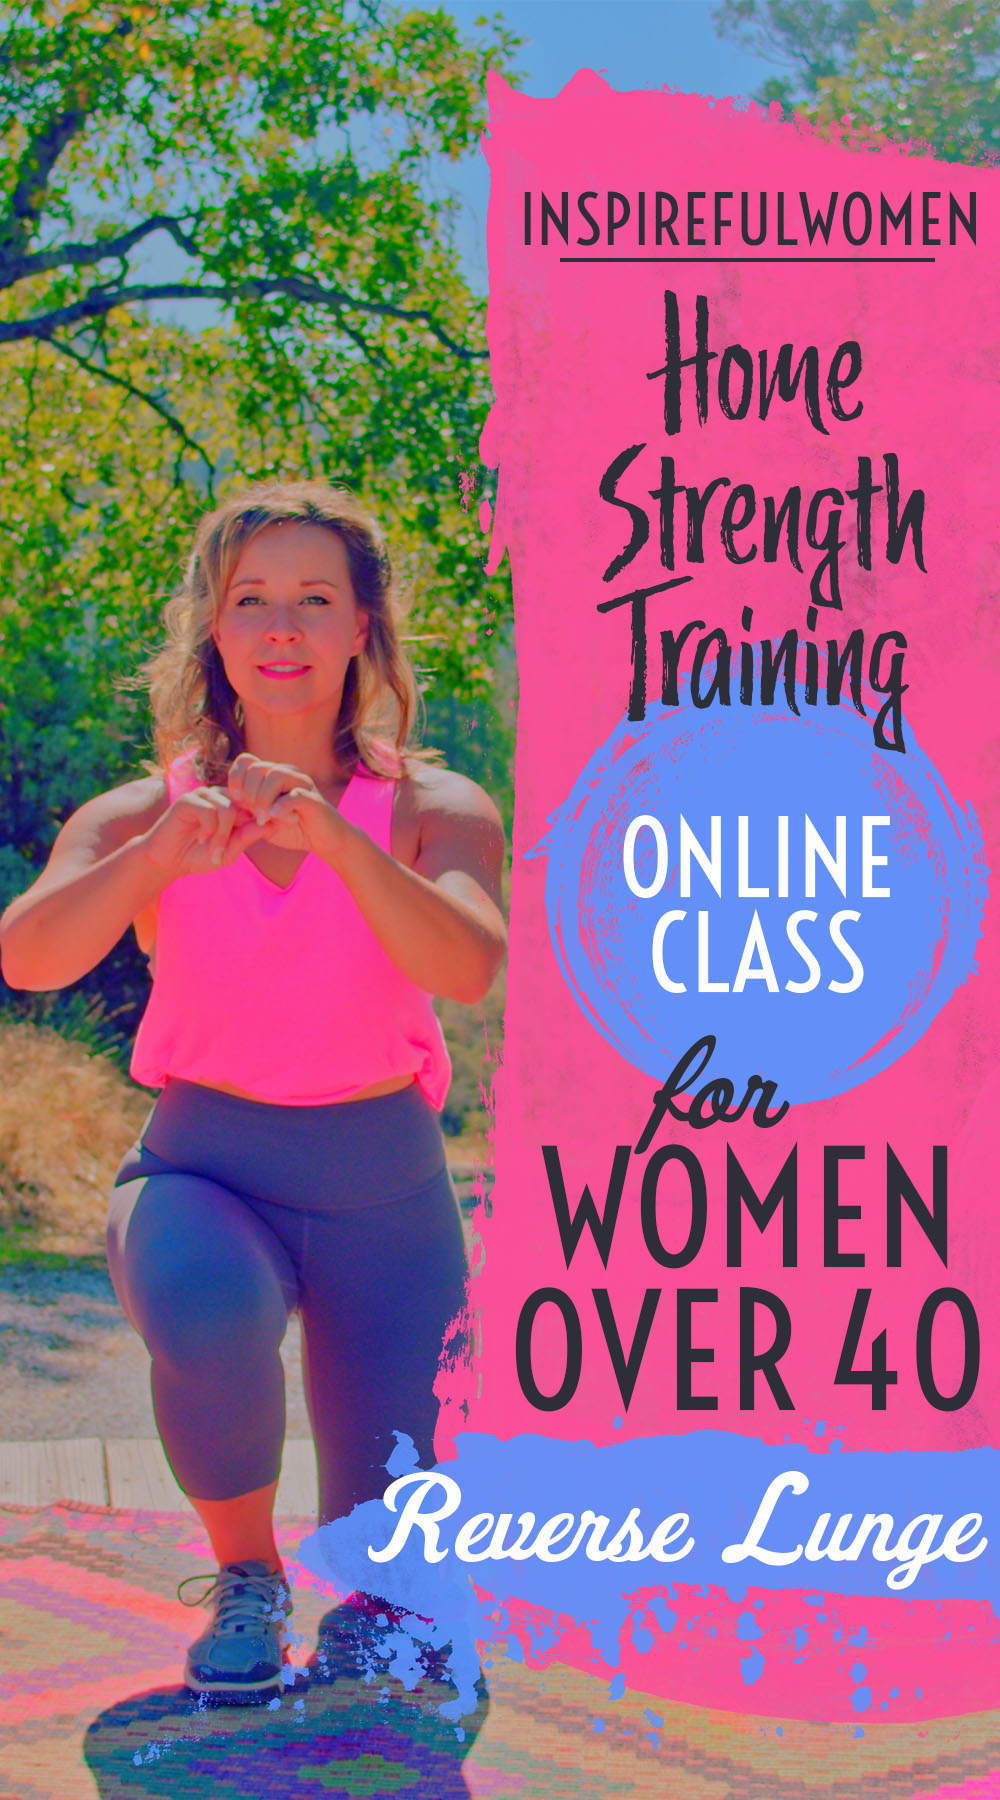 reverse-lunge-for-bad-knees-glutes-quadriceps-resistance-exercise-at-home-women-40-plus